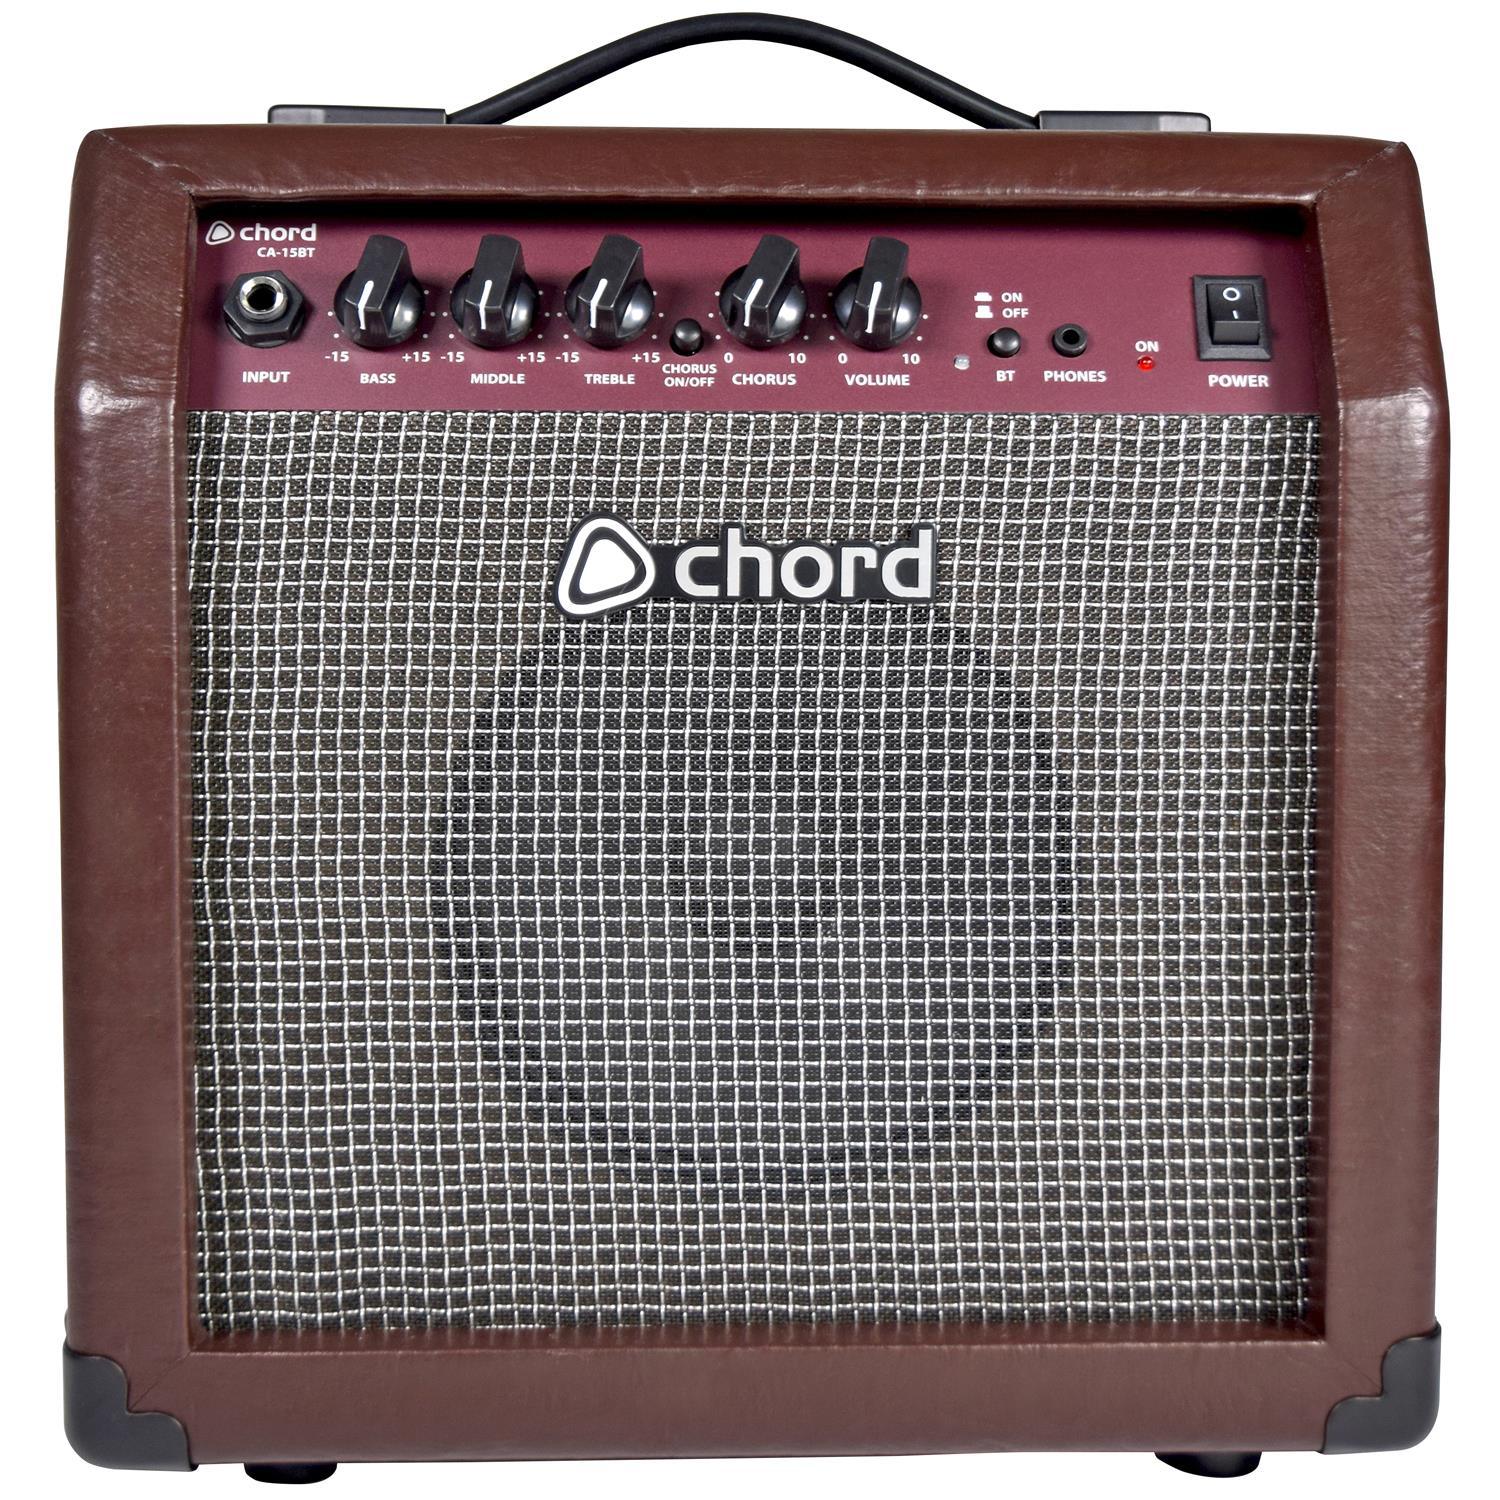 Chord CA-15BT Acoustic Guitar Amp with Bluetooth - DY Pro Audio